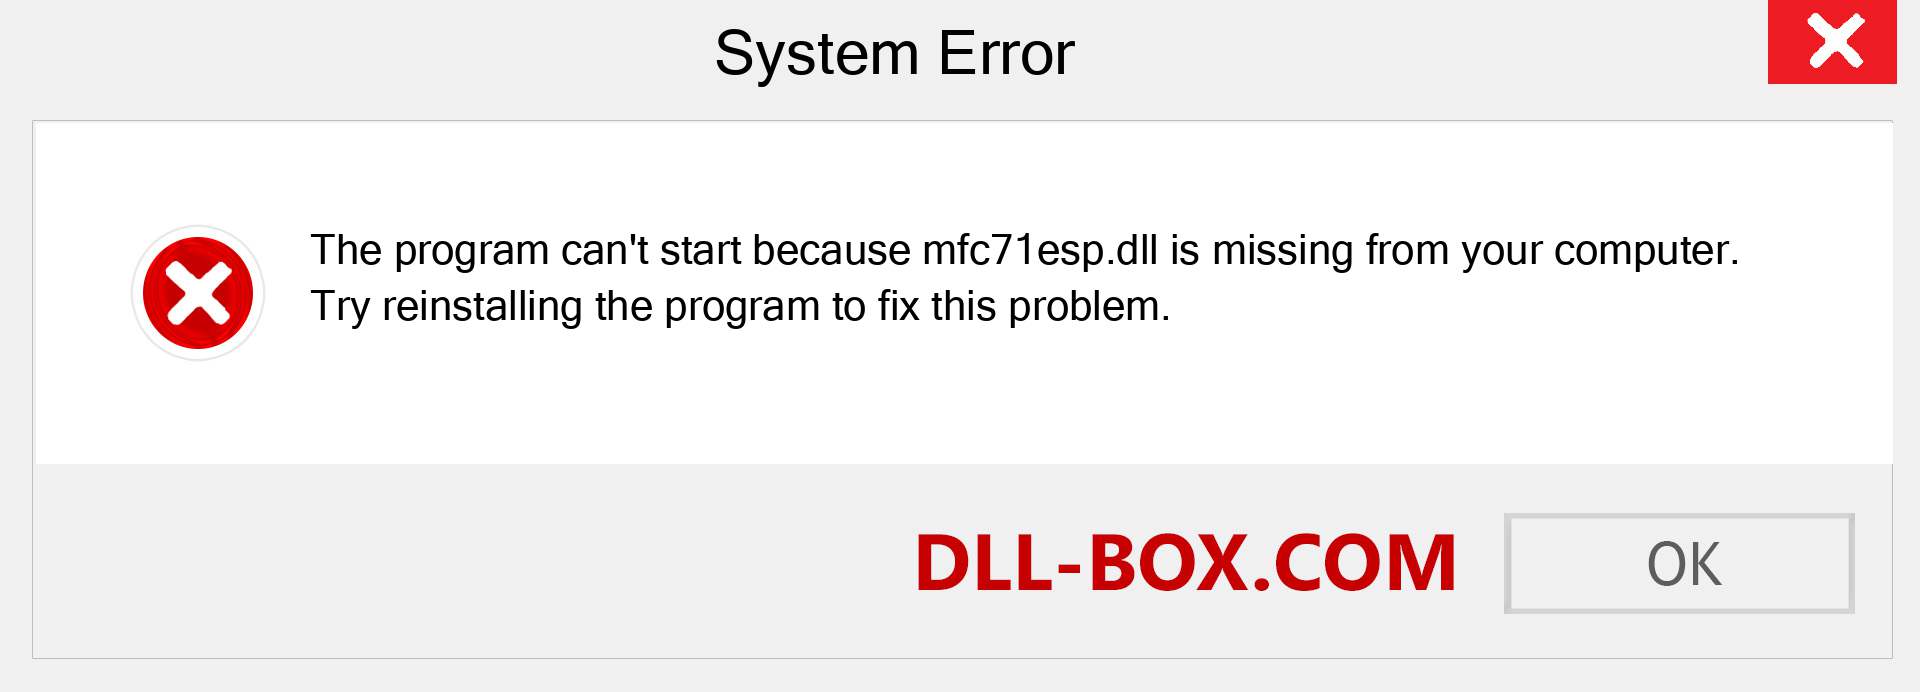  mfc71esp.dll file is missing?. Download for Windows 7, 8, 10 - Fix  mfc71esp dll Missing Error on Windows, photos, images